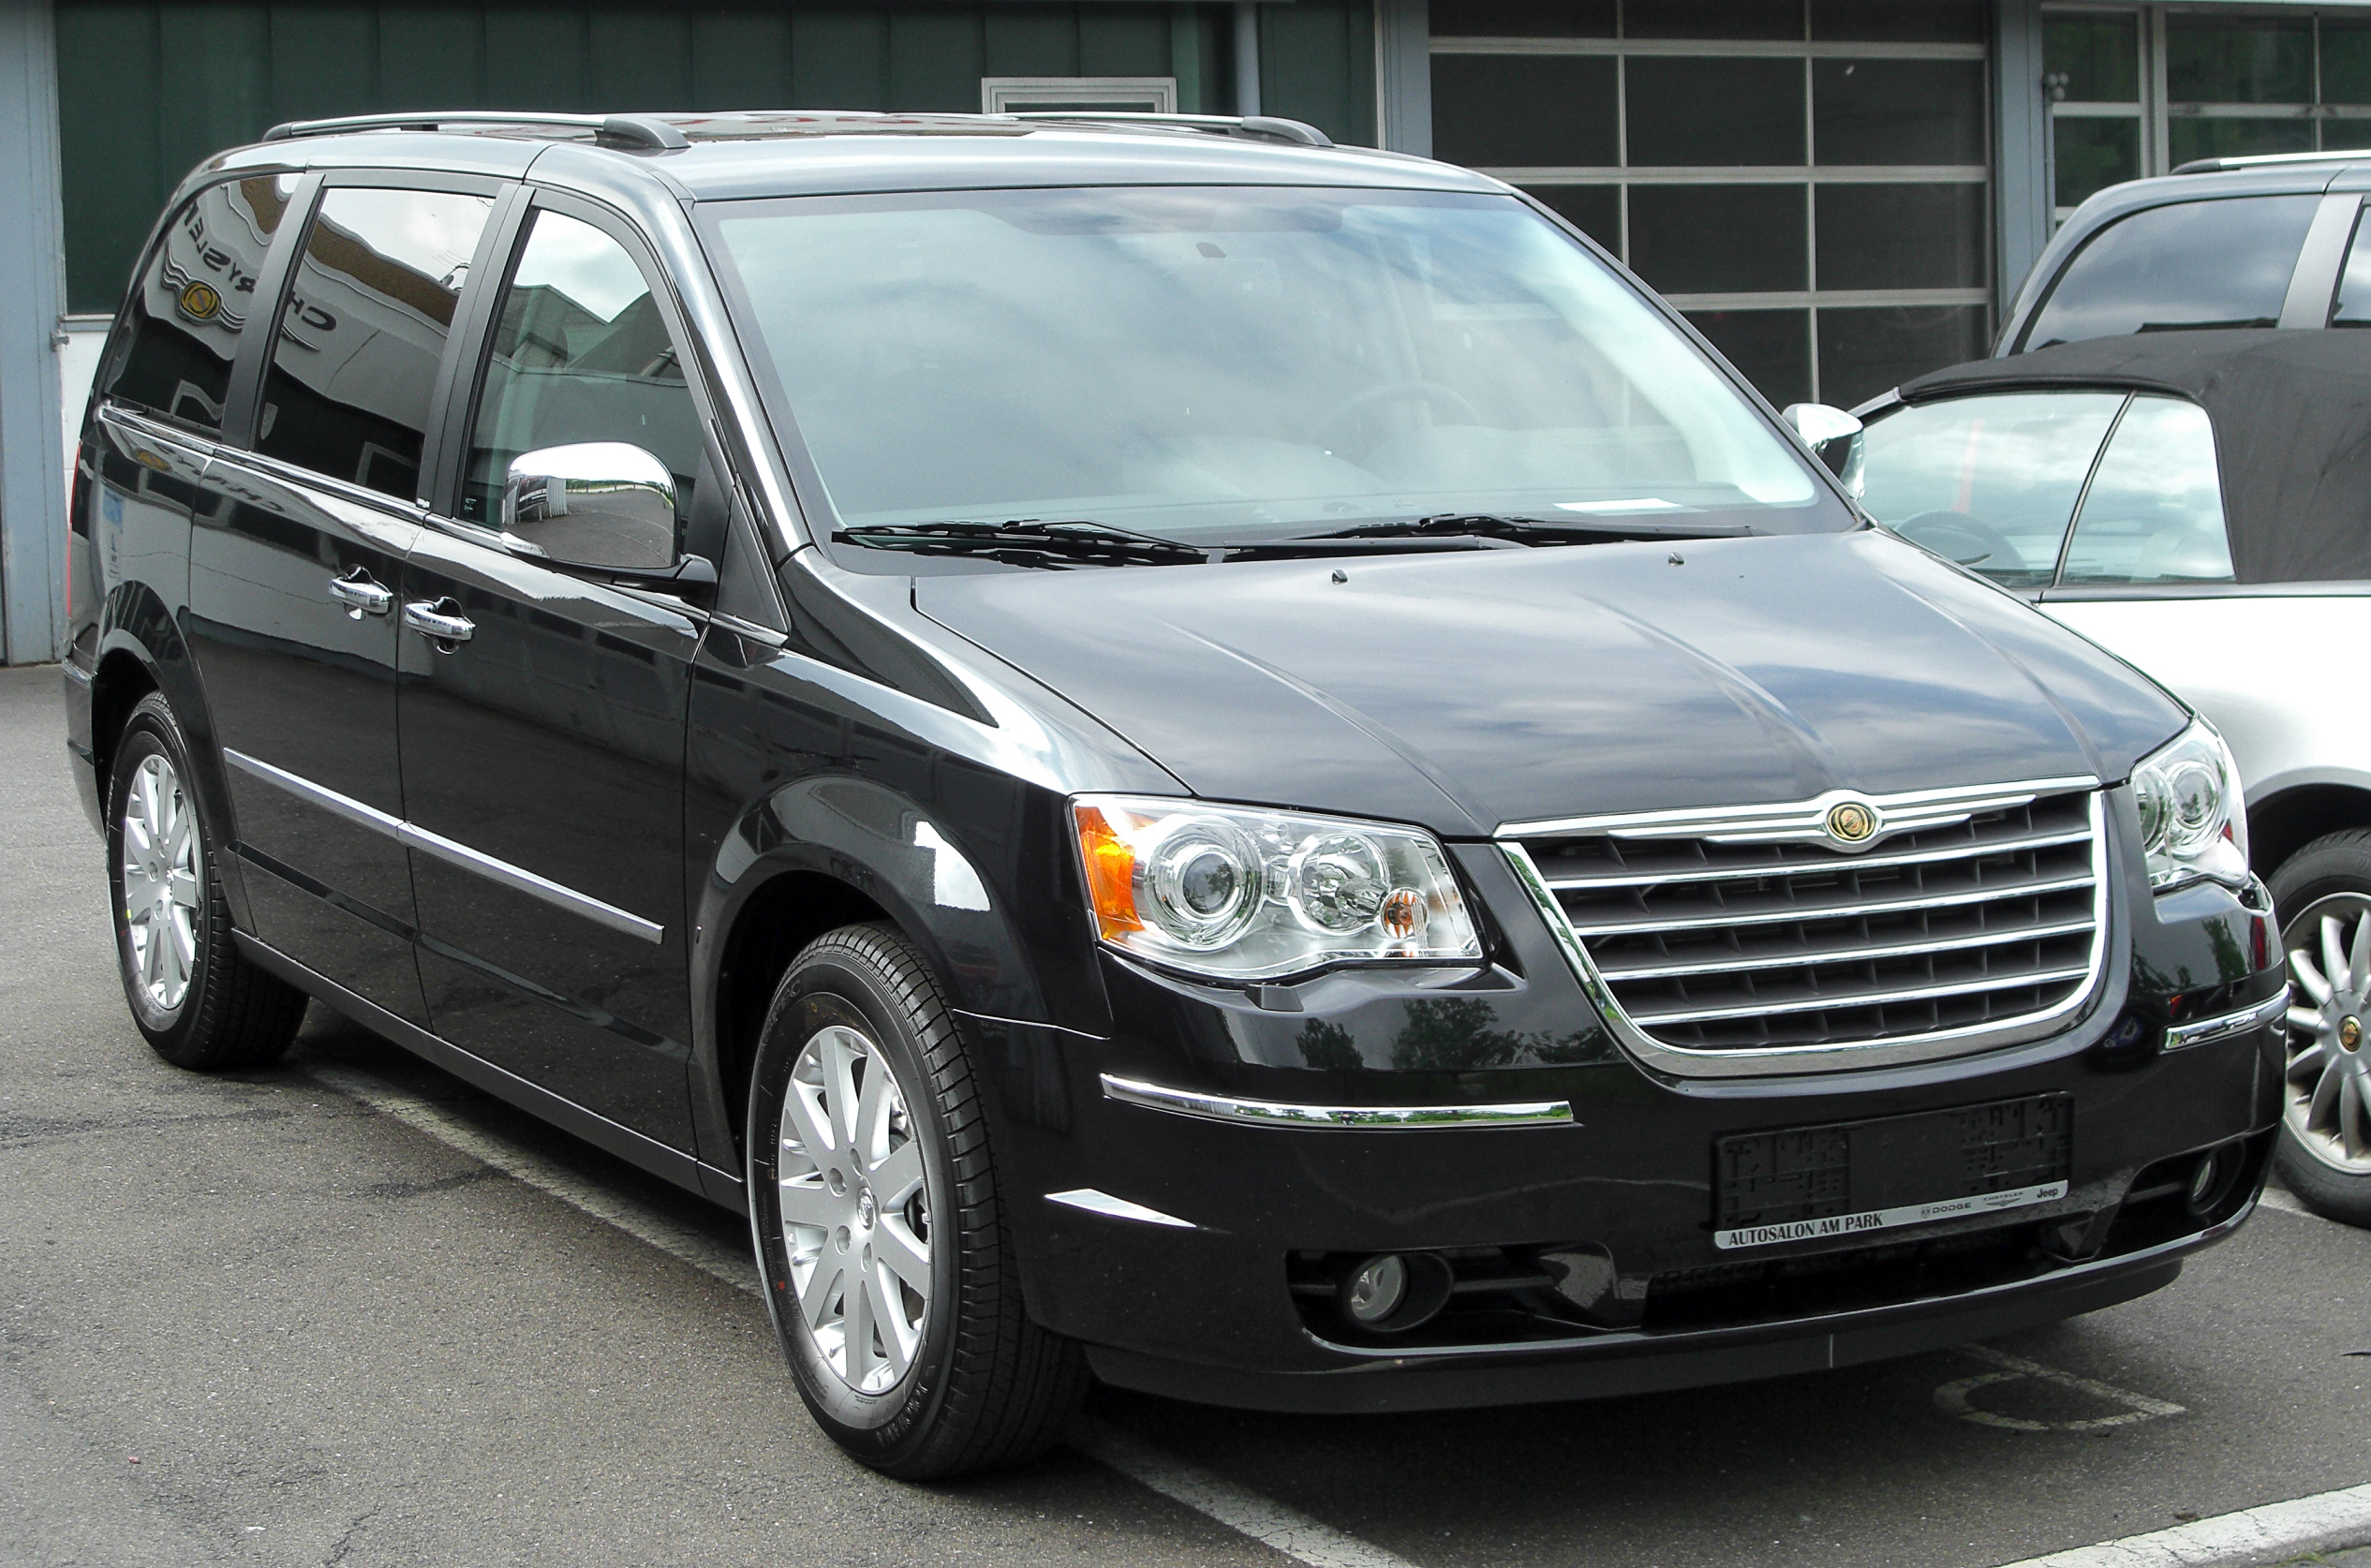 Chrysler Grand Voyager RTpicture 2 , reviews, news